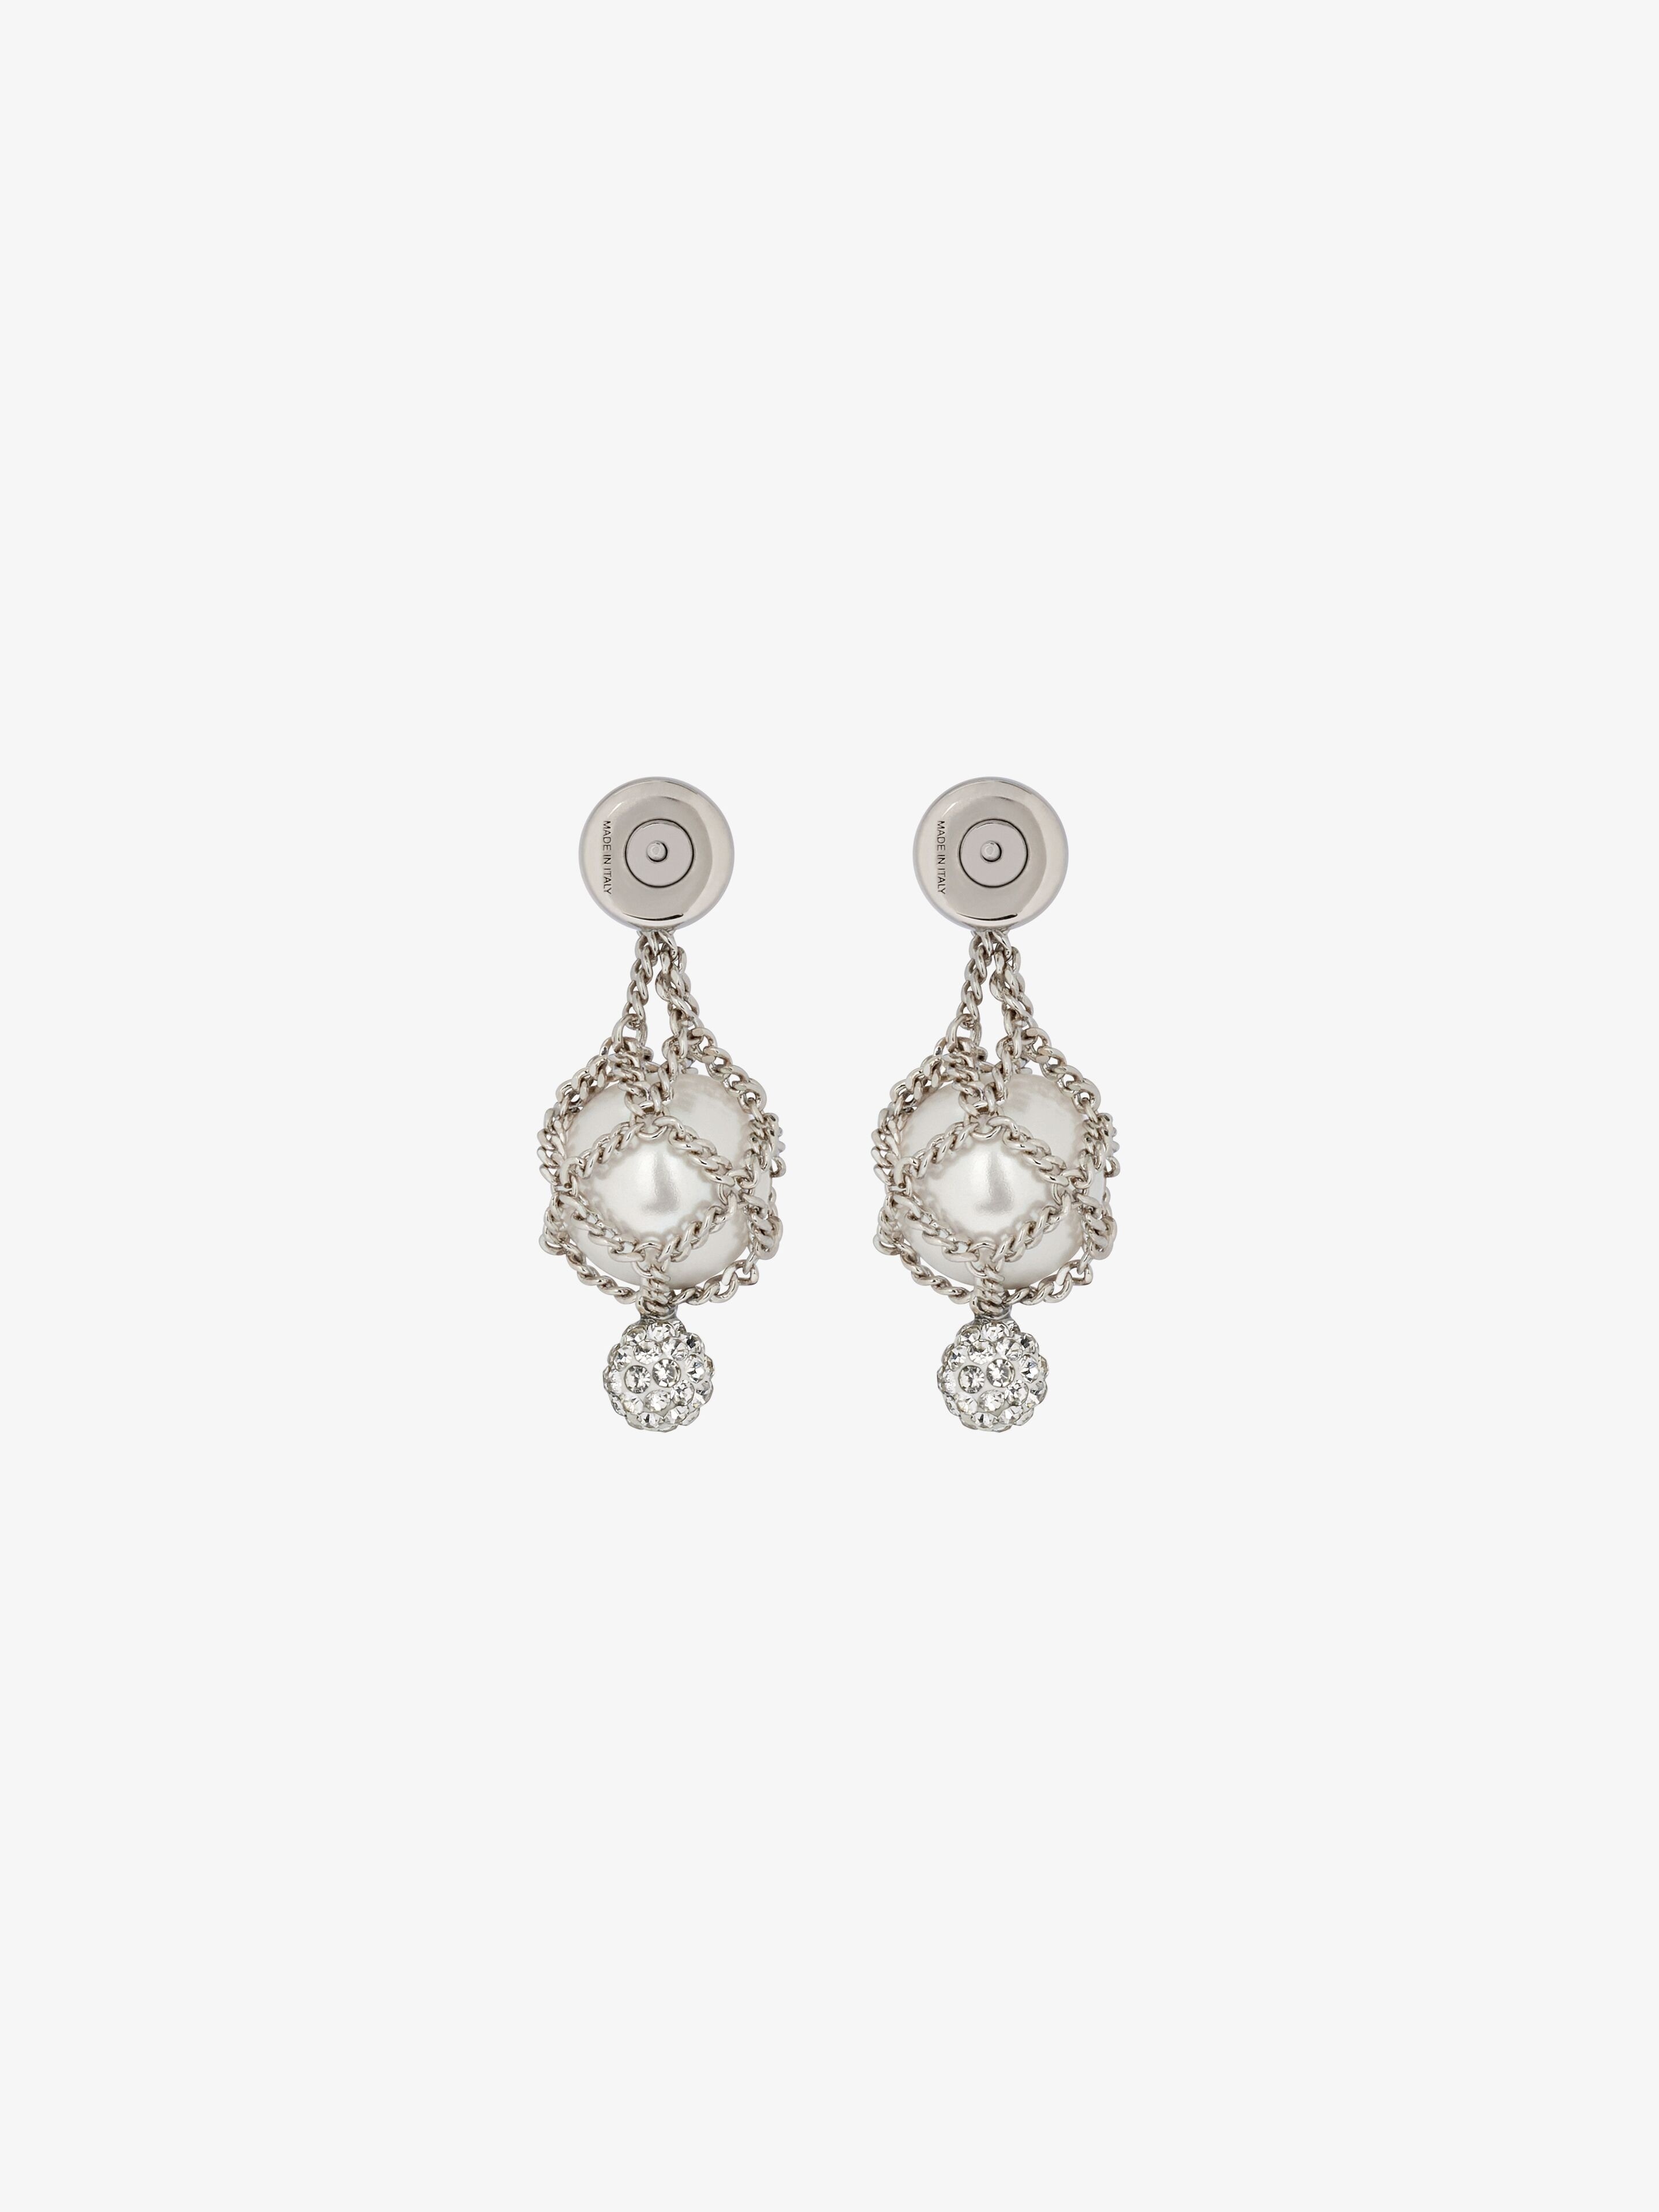 PEARLING EARRINGS IN METAL WITH PEARLS AND CRYSTALS - 2